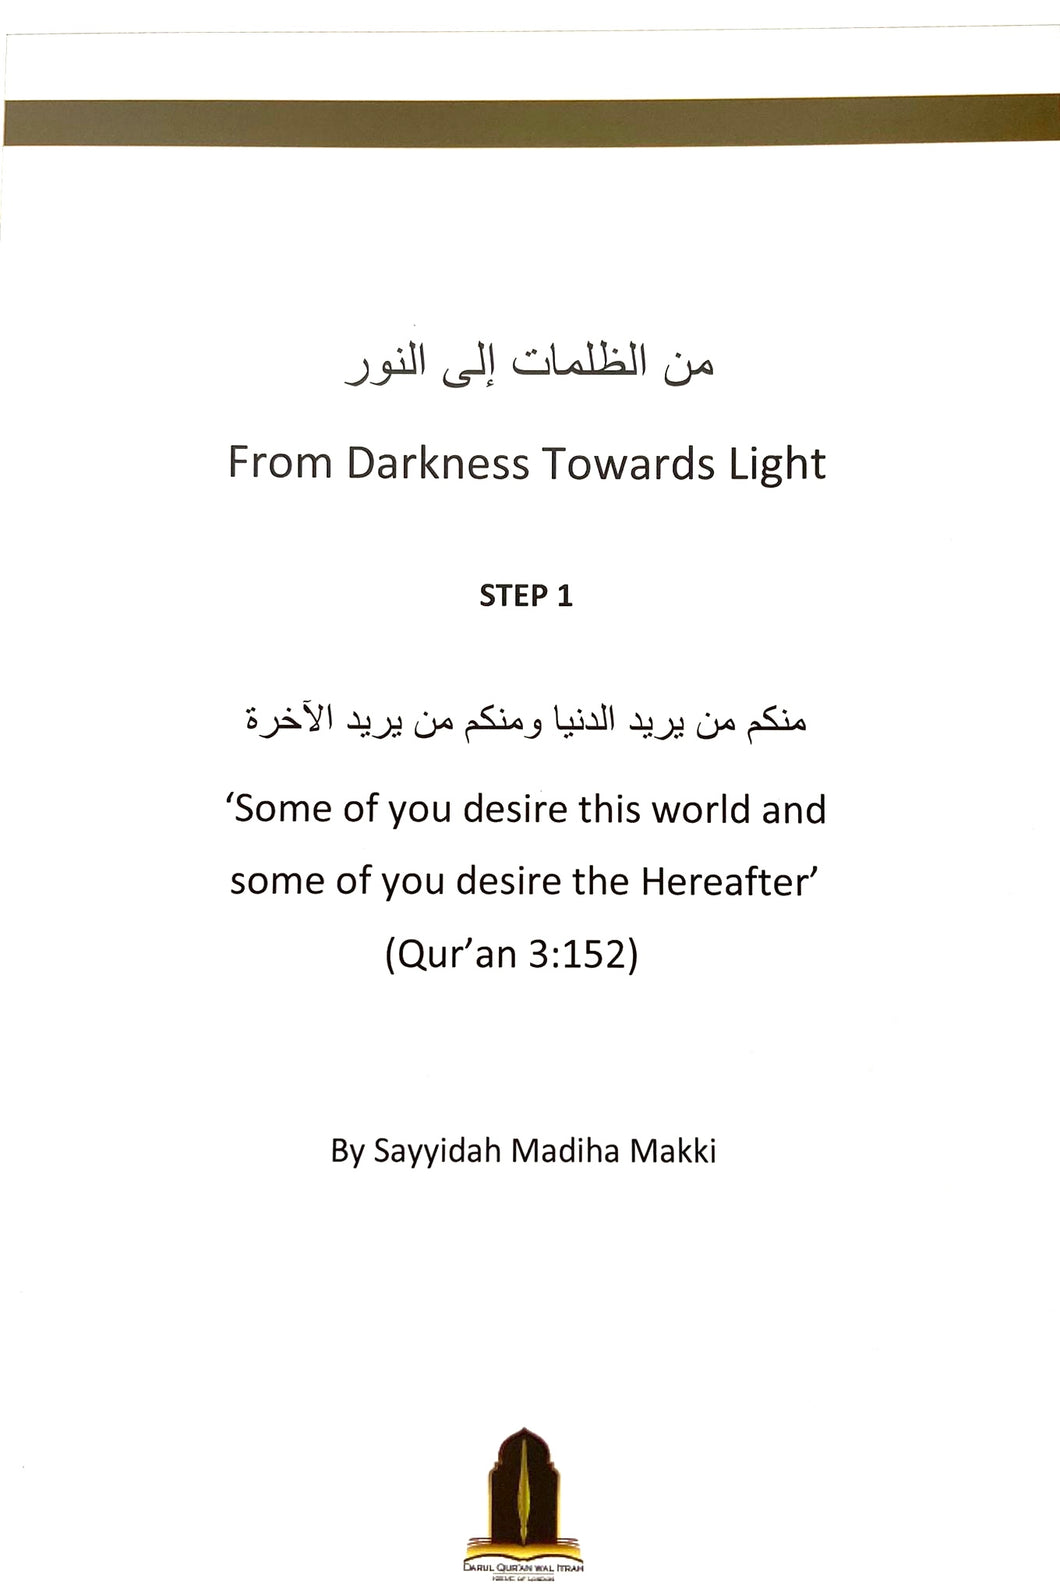 From Darkness Towards Light Booklet - Step 1